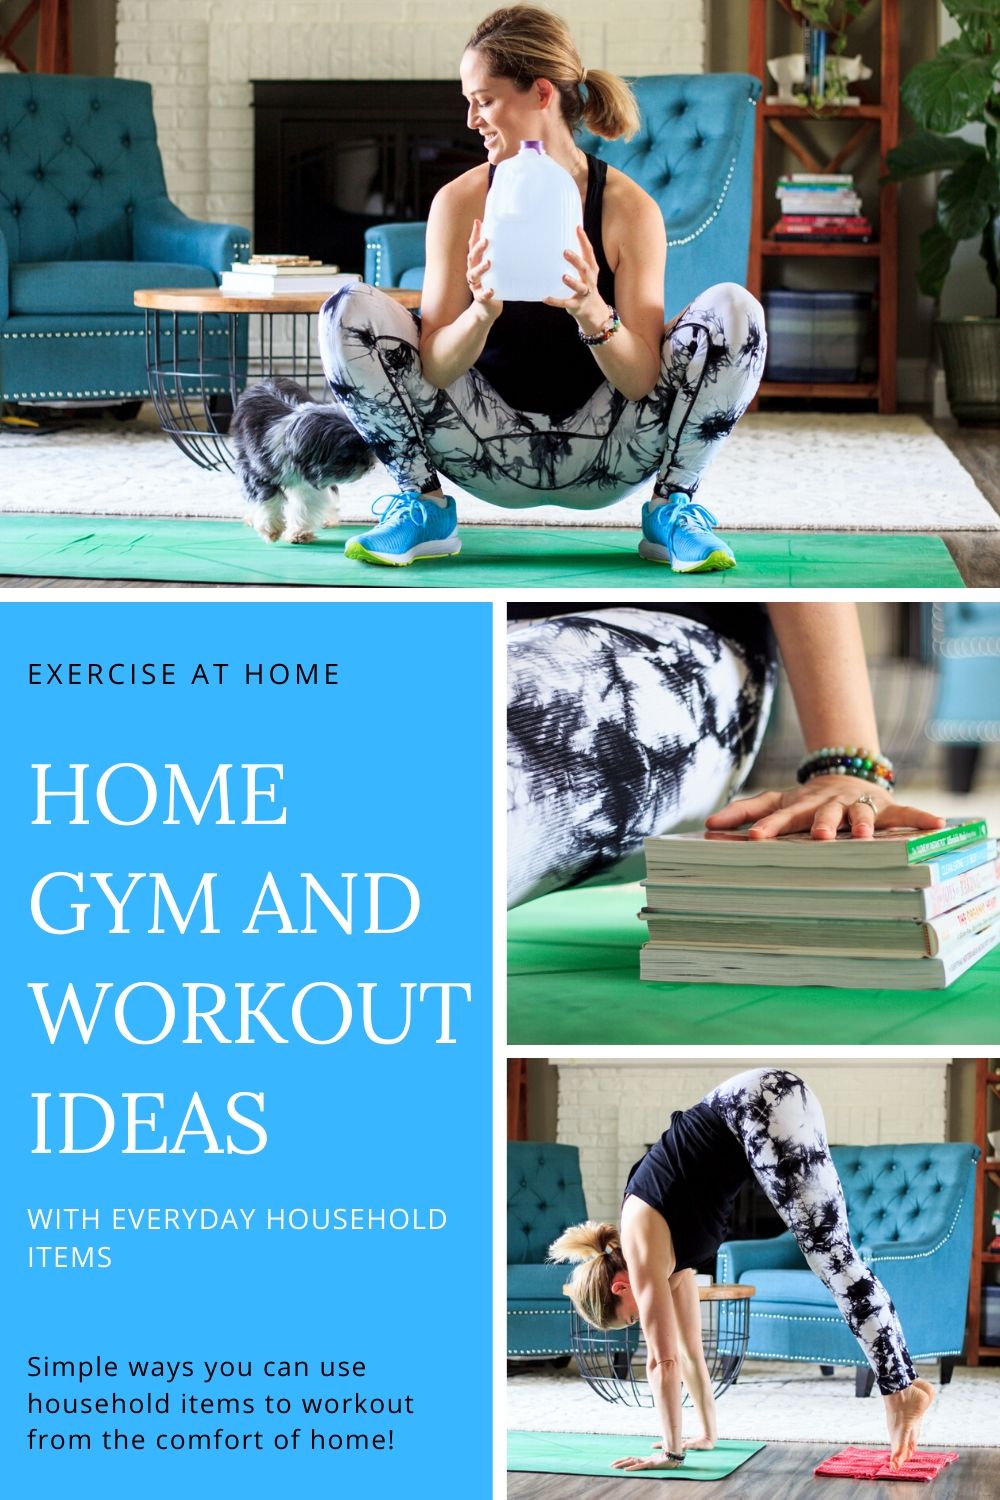 https://mommygonehealthy.com/wp-content/uploads/2020/04/HOME-GYM-AND-WORKOUT-IDEAS.jpg